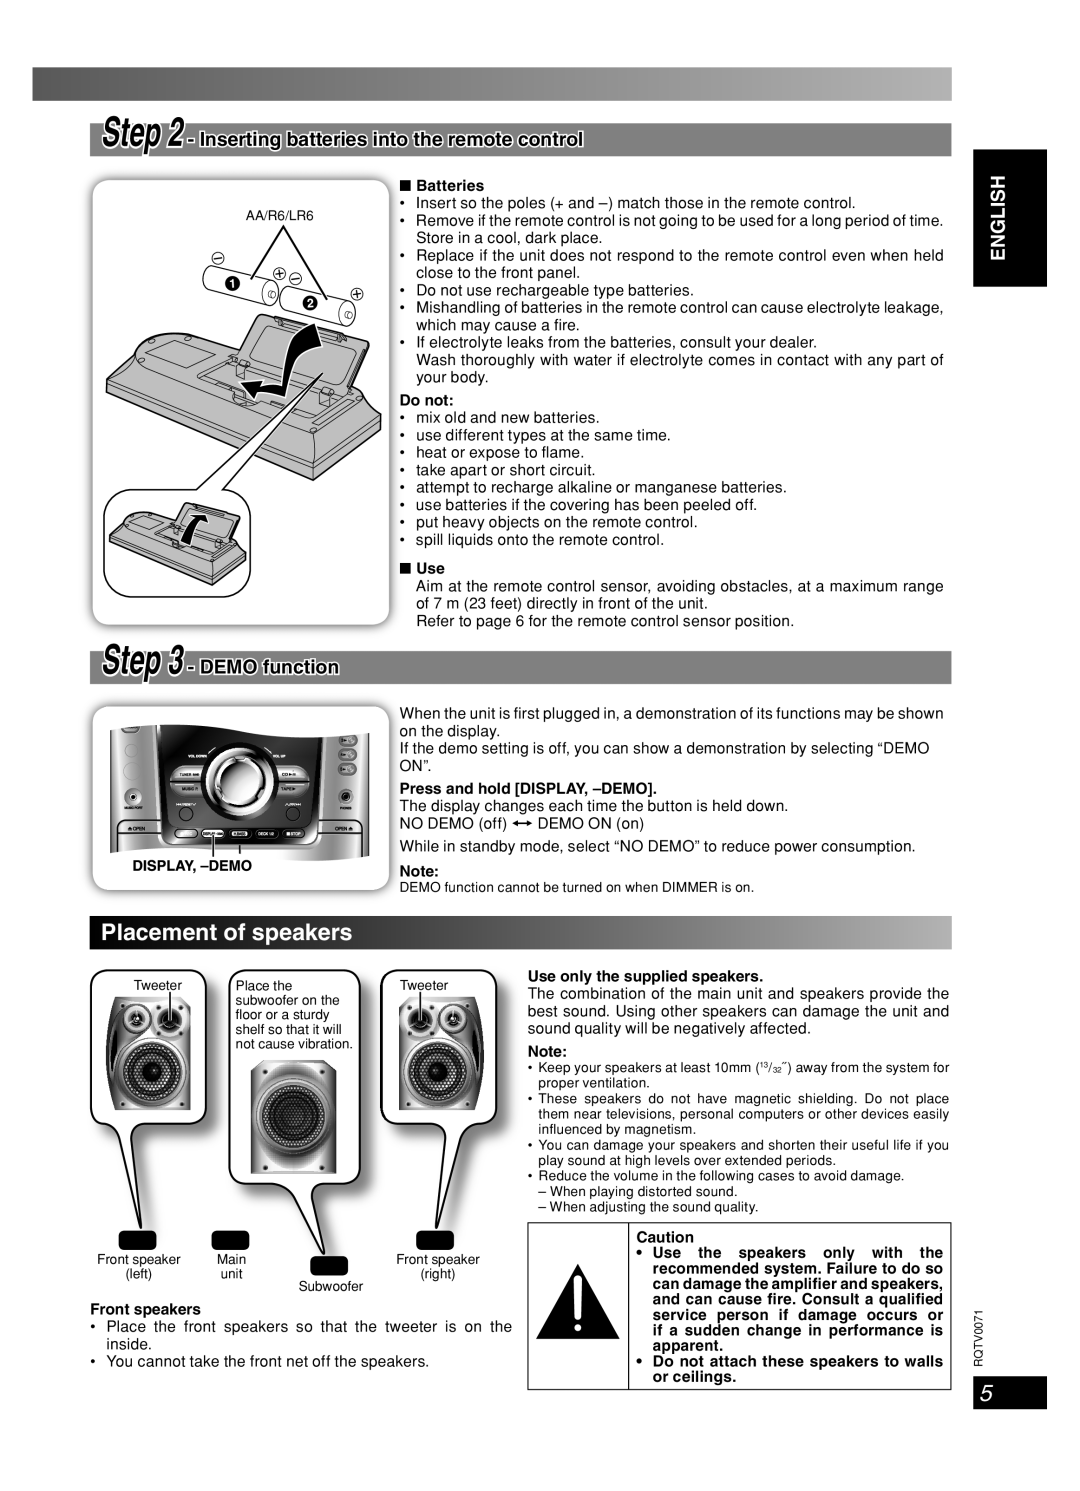 Panasonic SC-AK640 Placement of speakers, Lang Lang, English Dansk, Batteries, Do not, Press and hold DISPLAY, -DEMO 